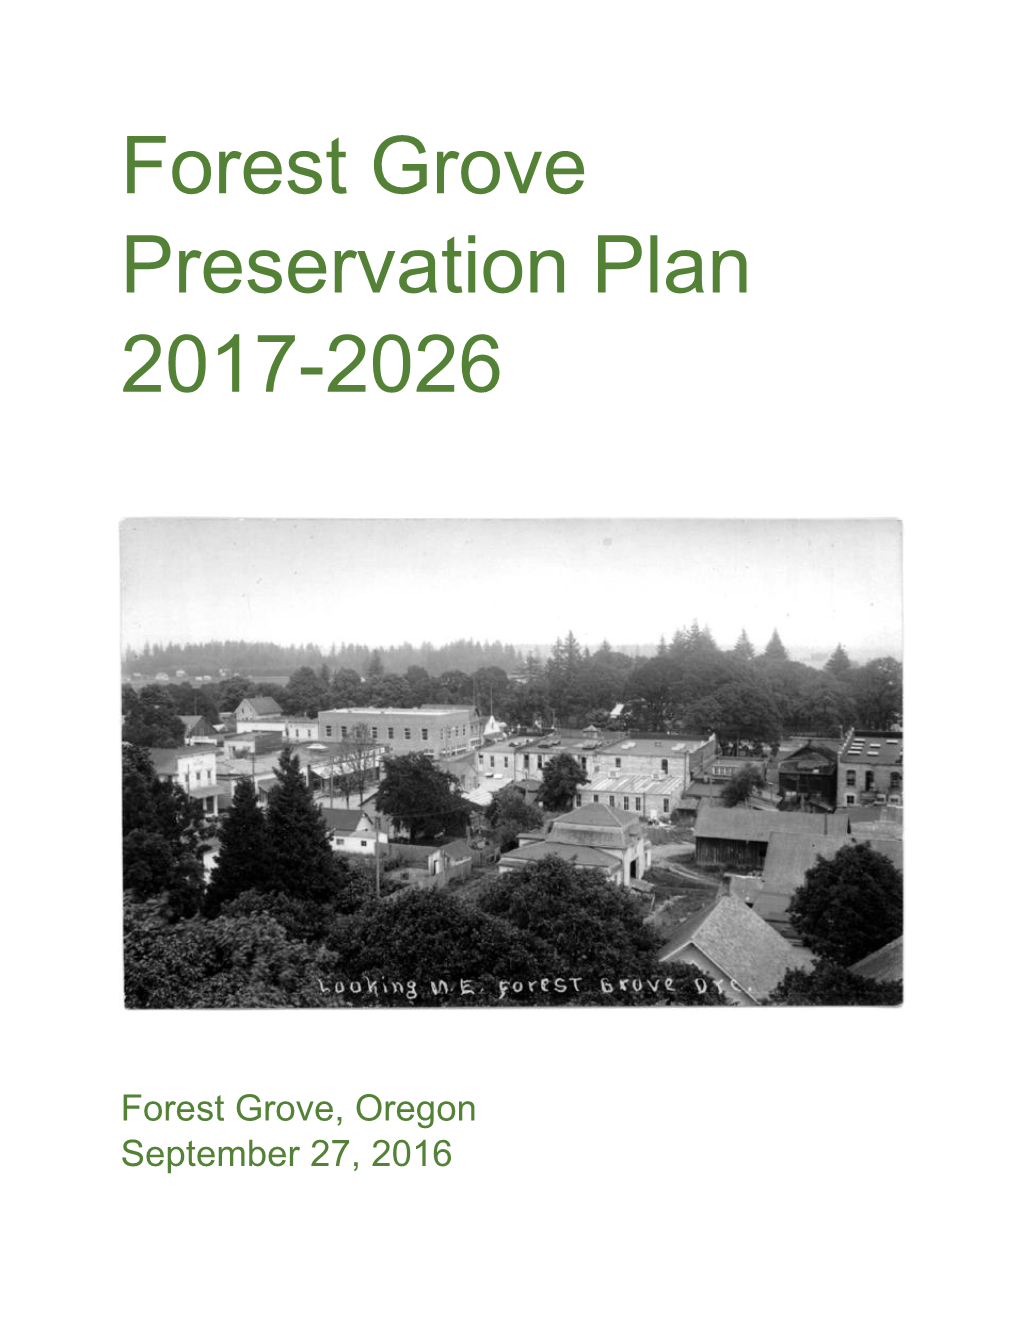 Adopted Preservation Plan 2017-2026